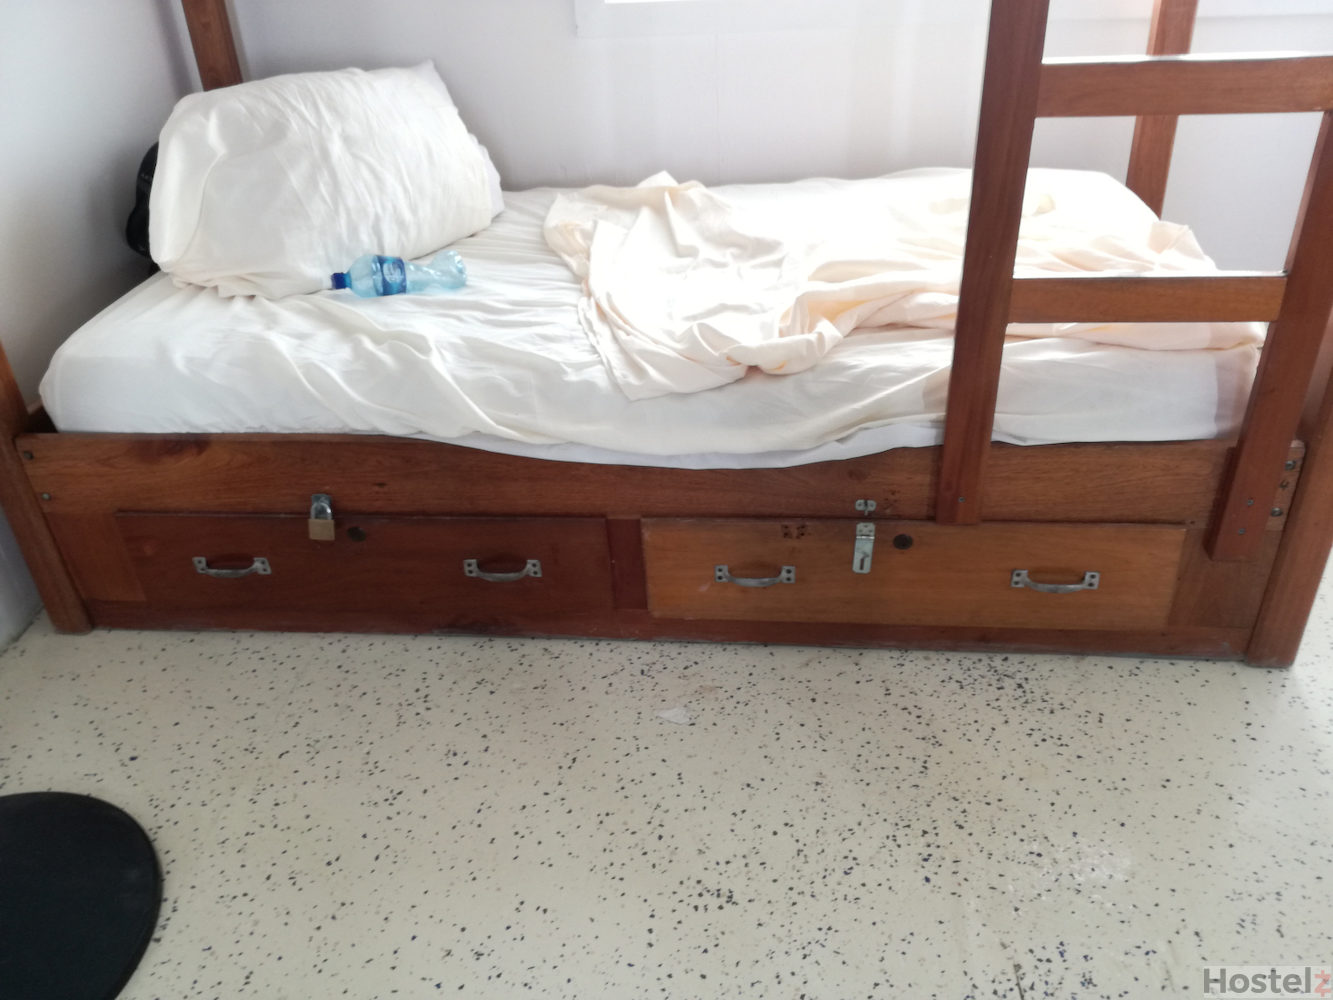 Lockable drawers under the bunk beds